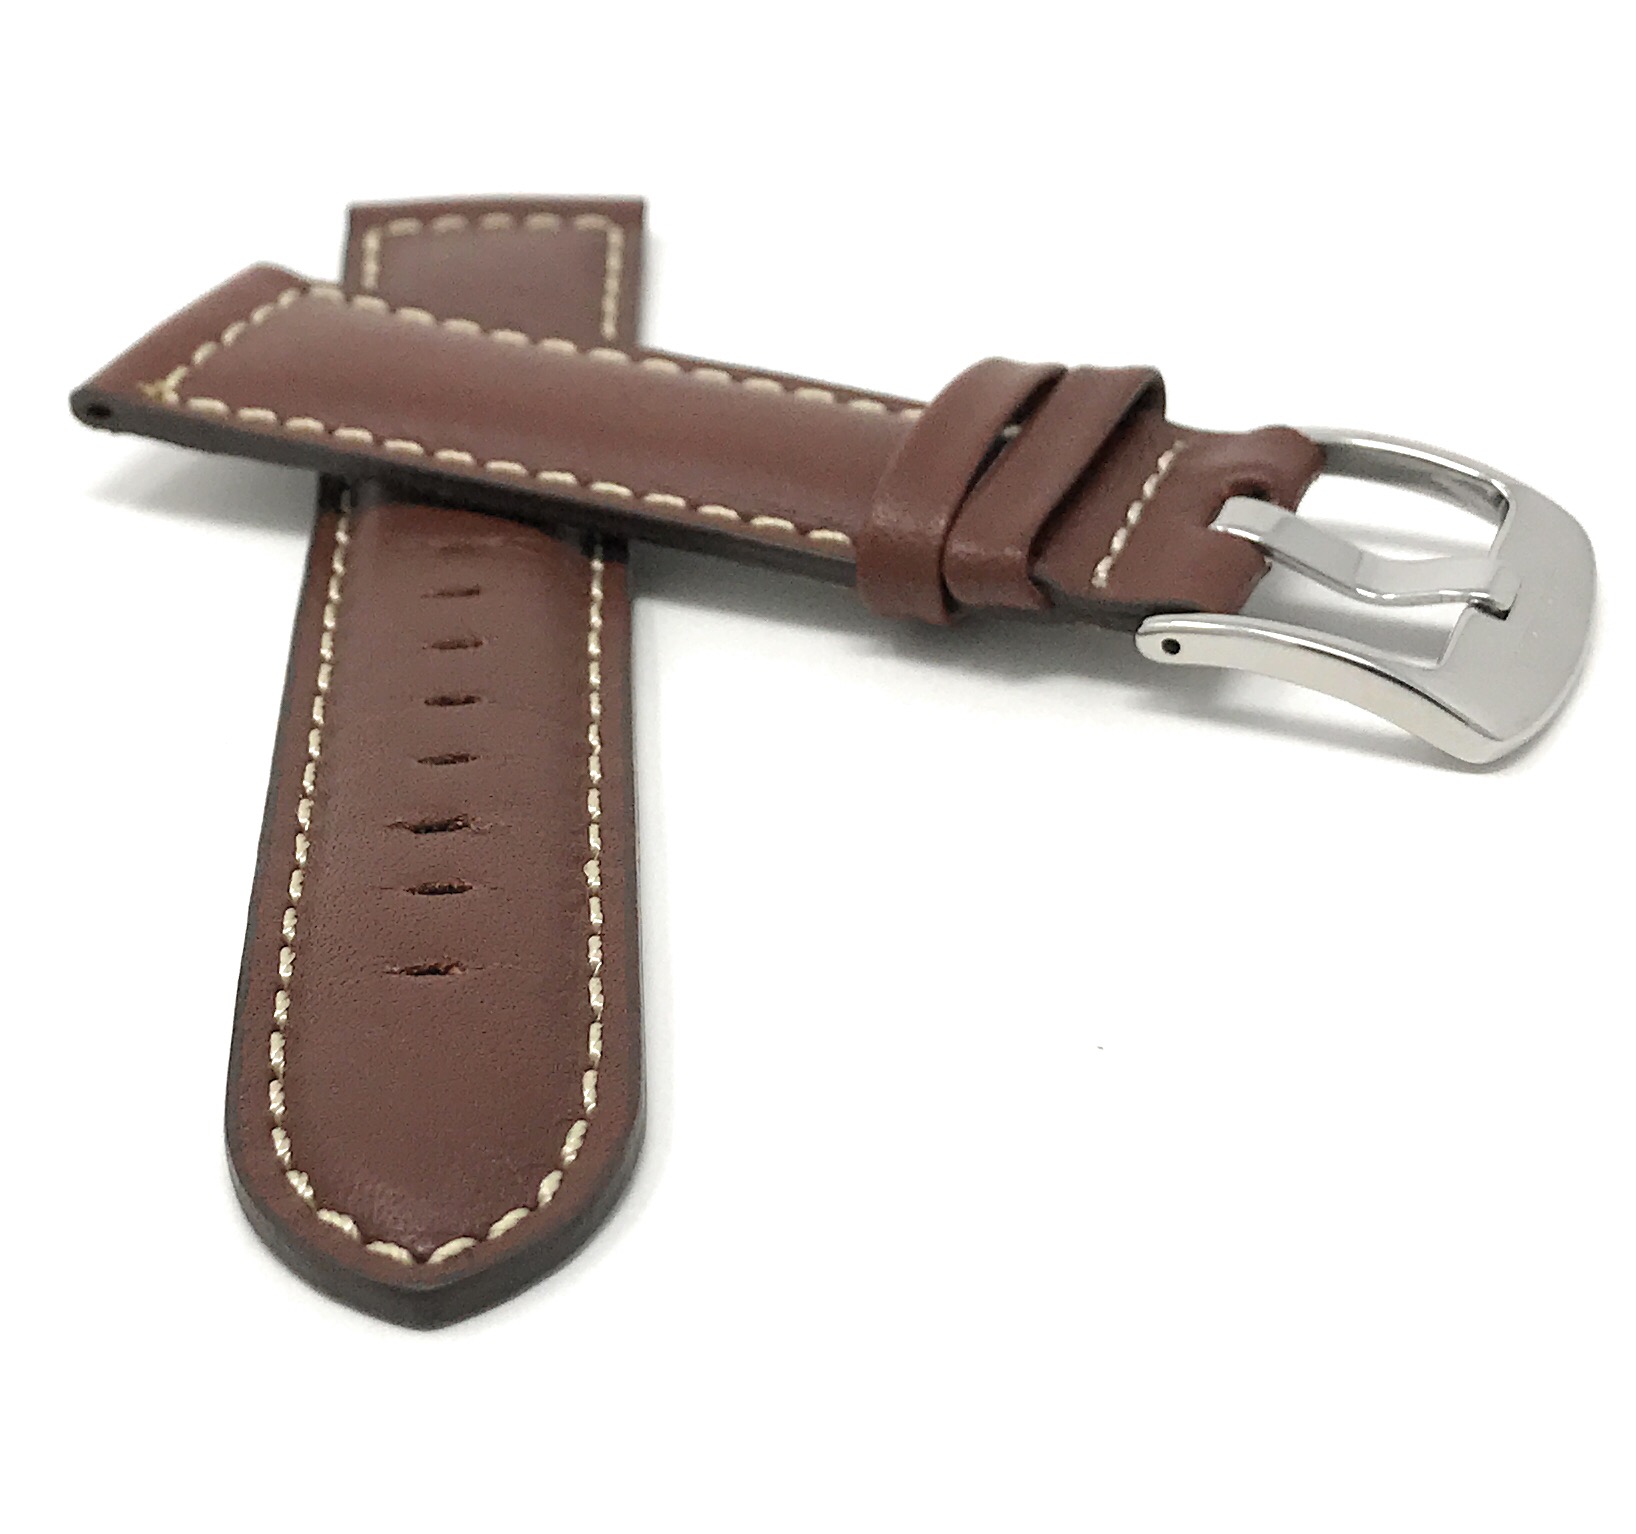 Bandini Watch Band, Leather Strap, Black Brown Tan, 18mm - 30mm Extra ...